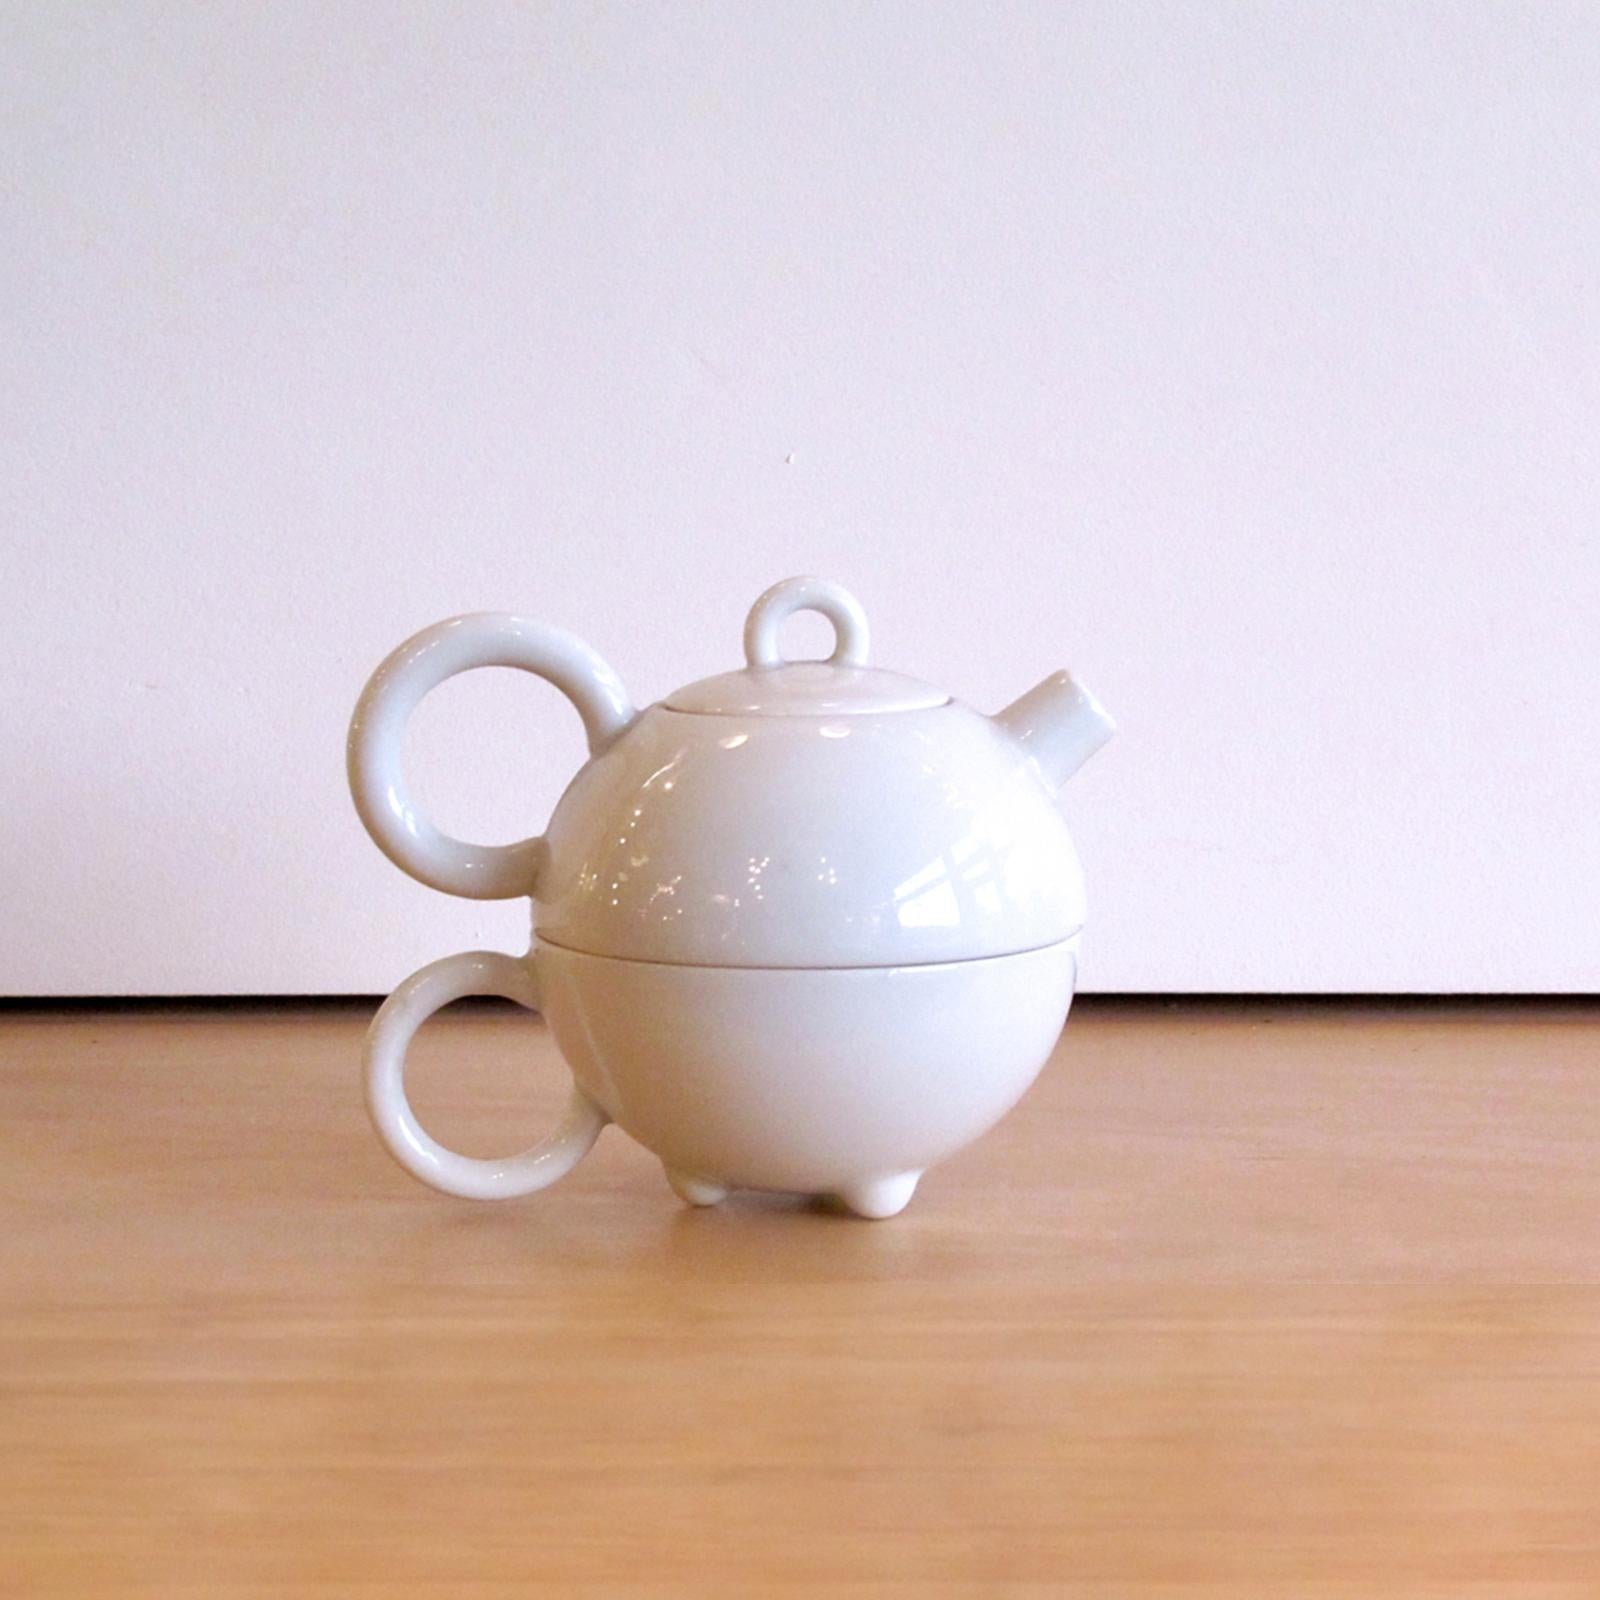 Matteo Thun for Arzberg Tea-for-One Set, 1980 For Sale 1